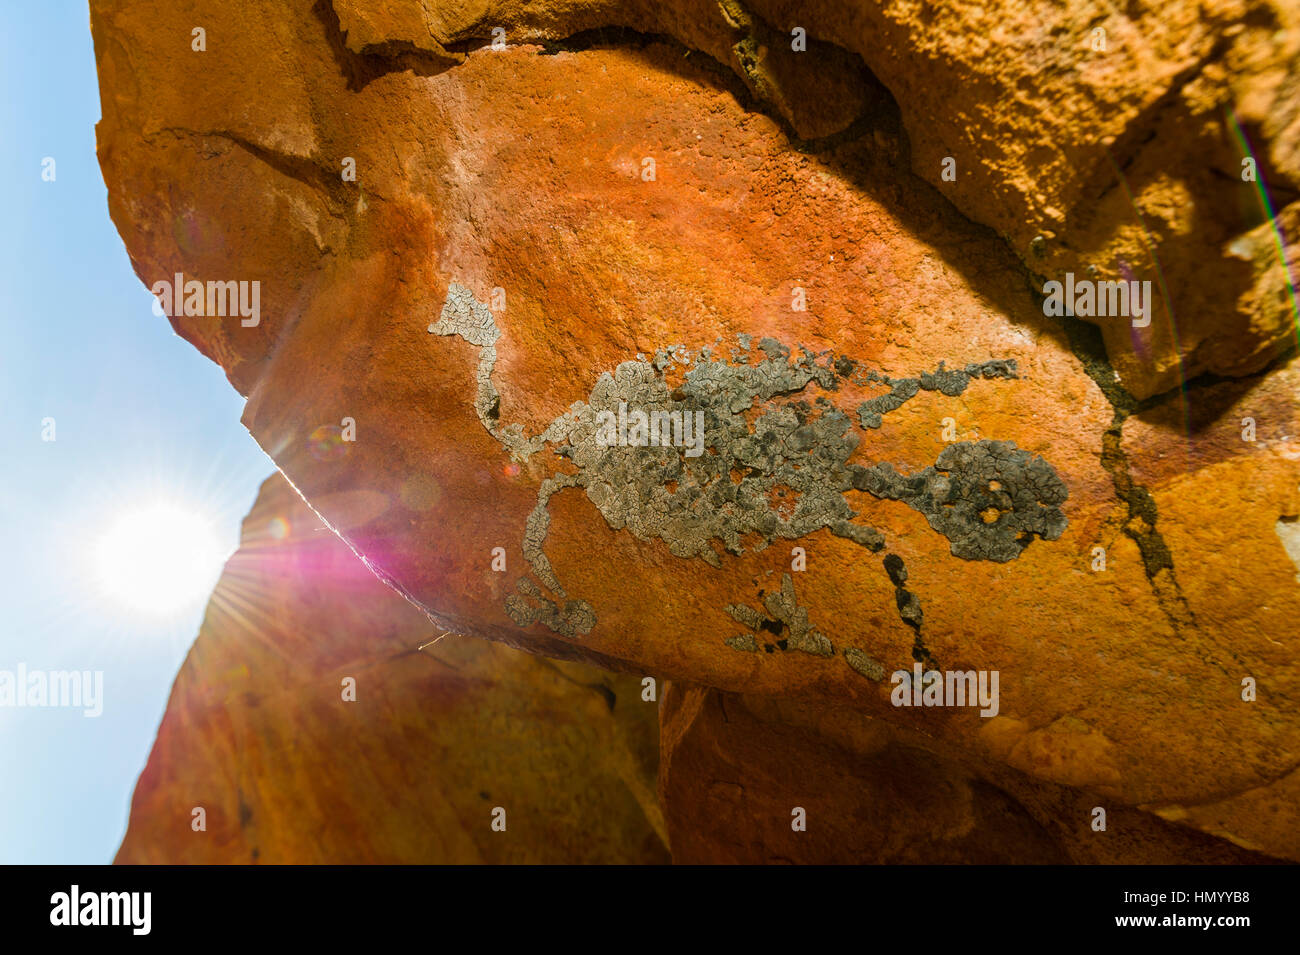 An ancient Aboriginal bees wax evil spirit on the ceiling of a sandstone cave. Stock Photo